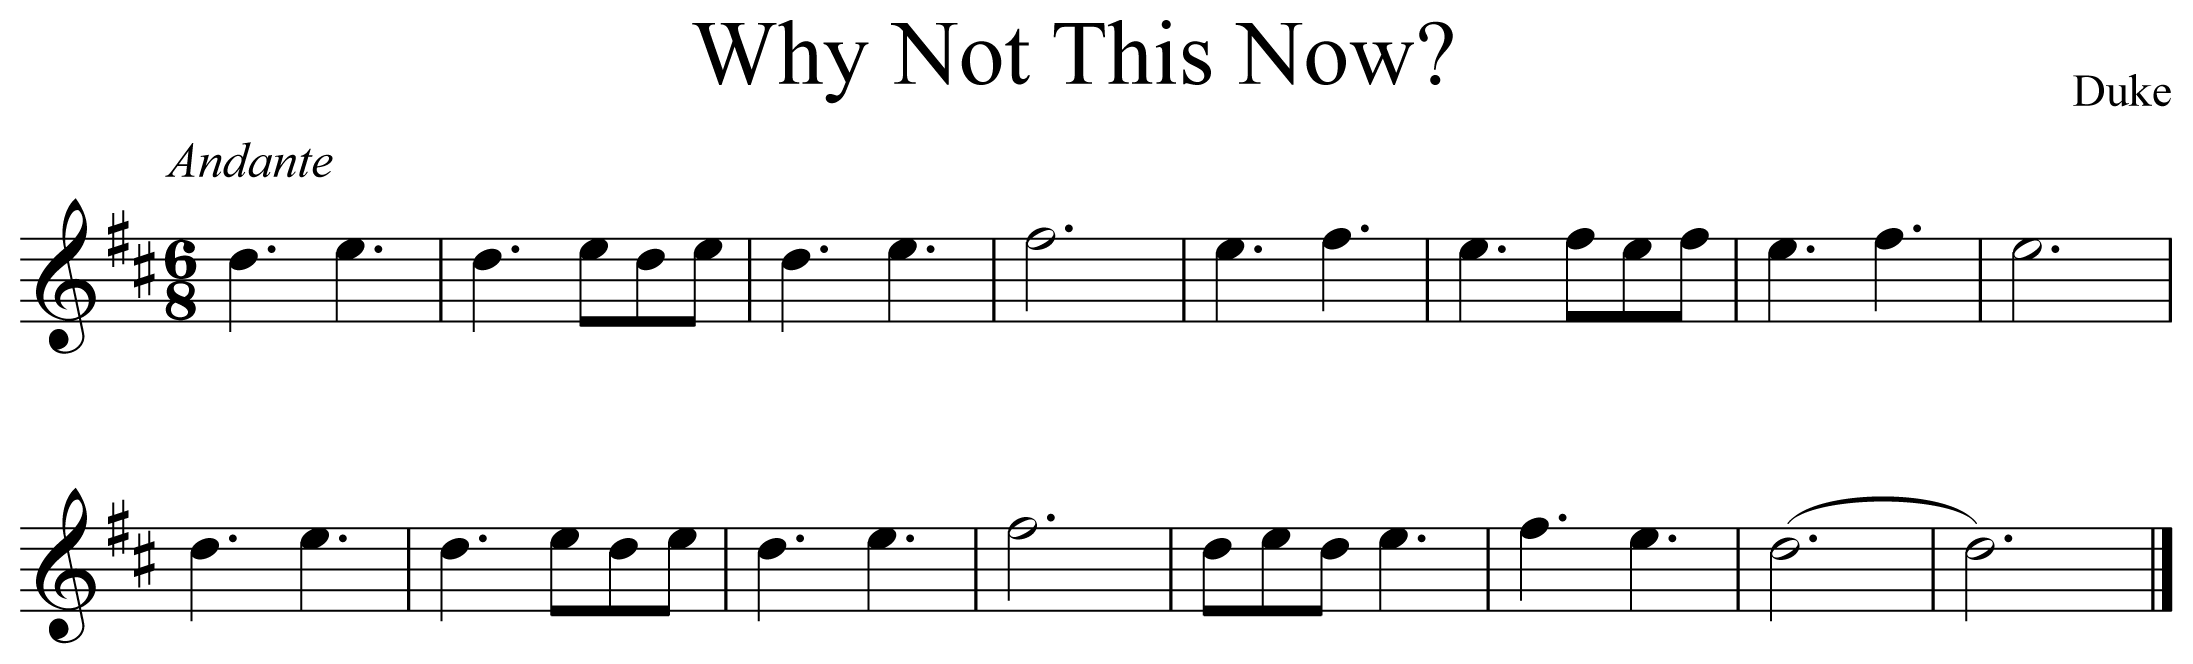 Why Not This Now Music Notation Saxophone